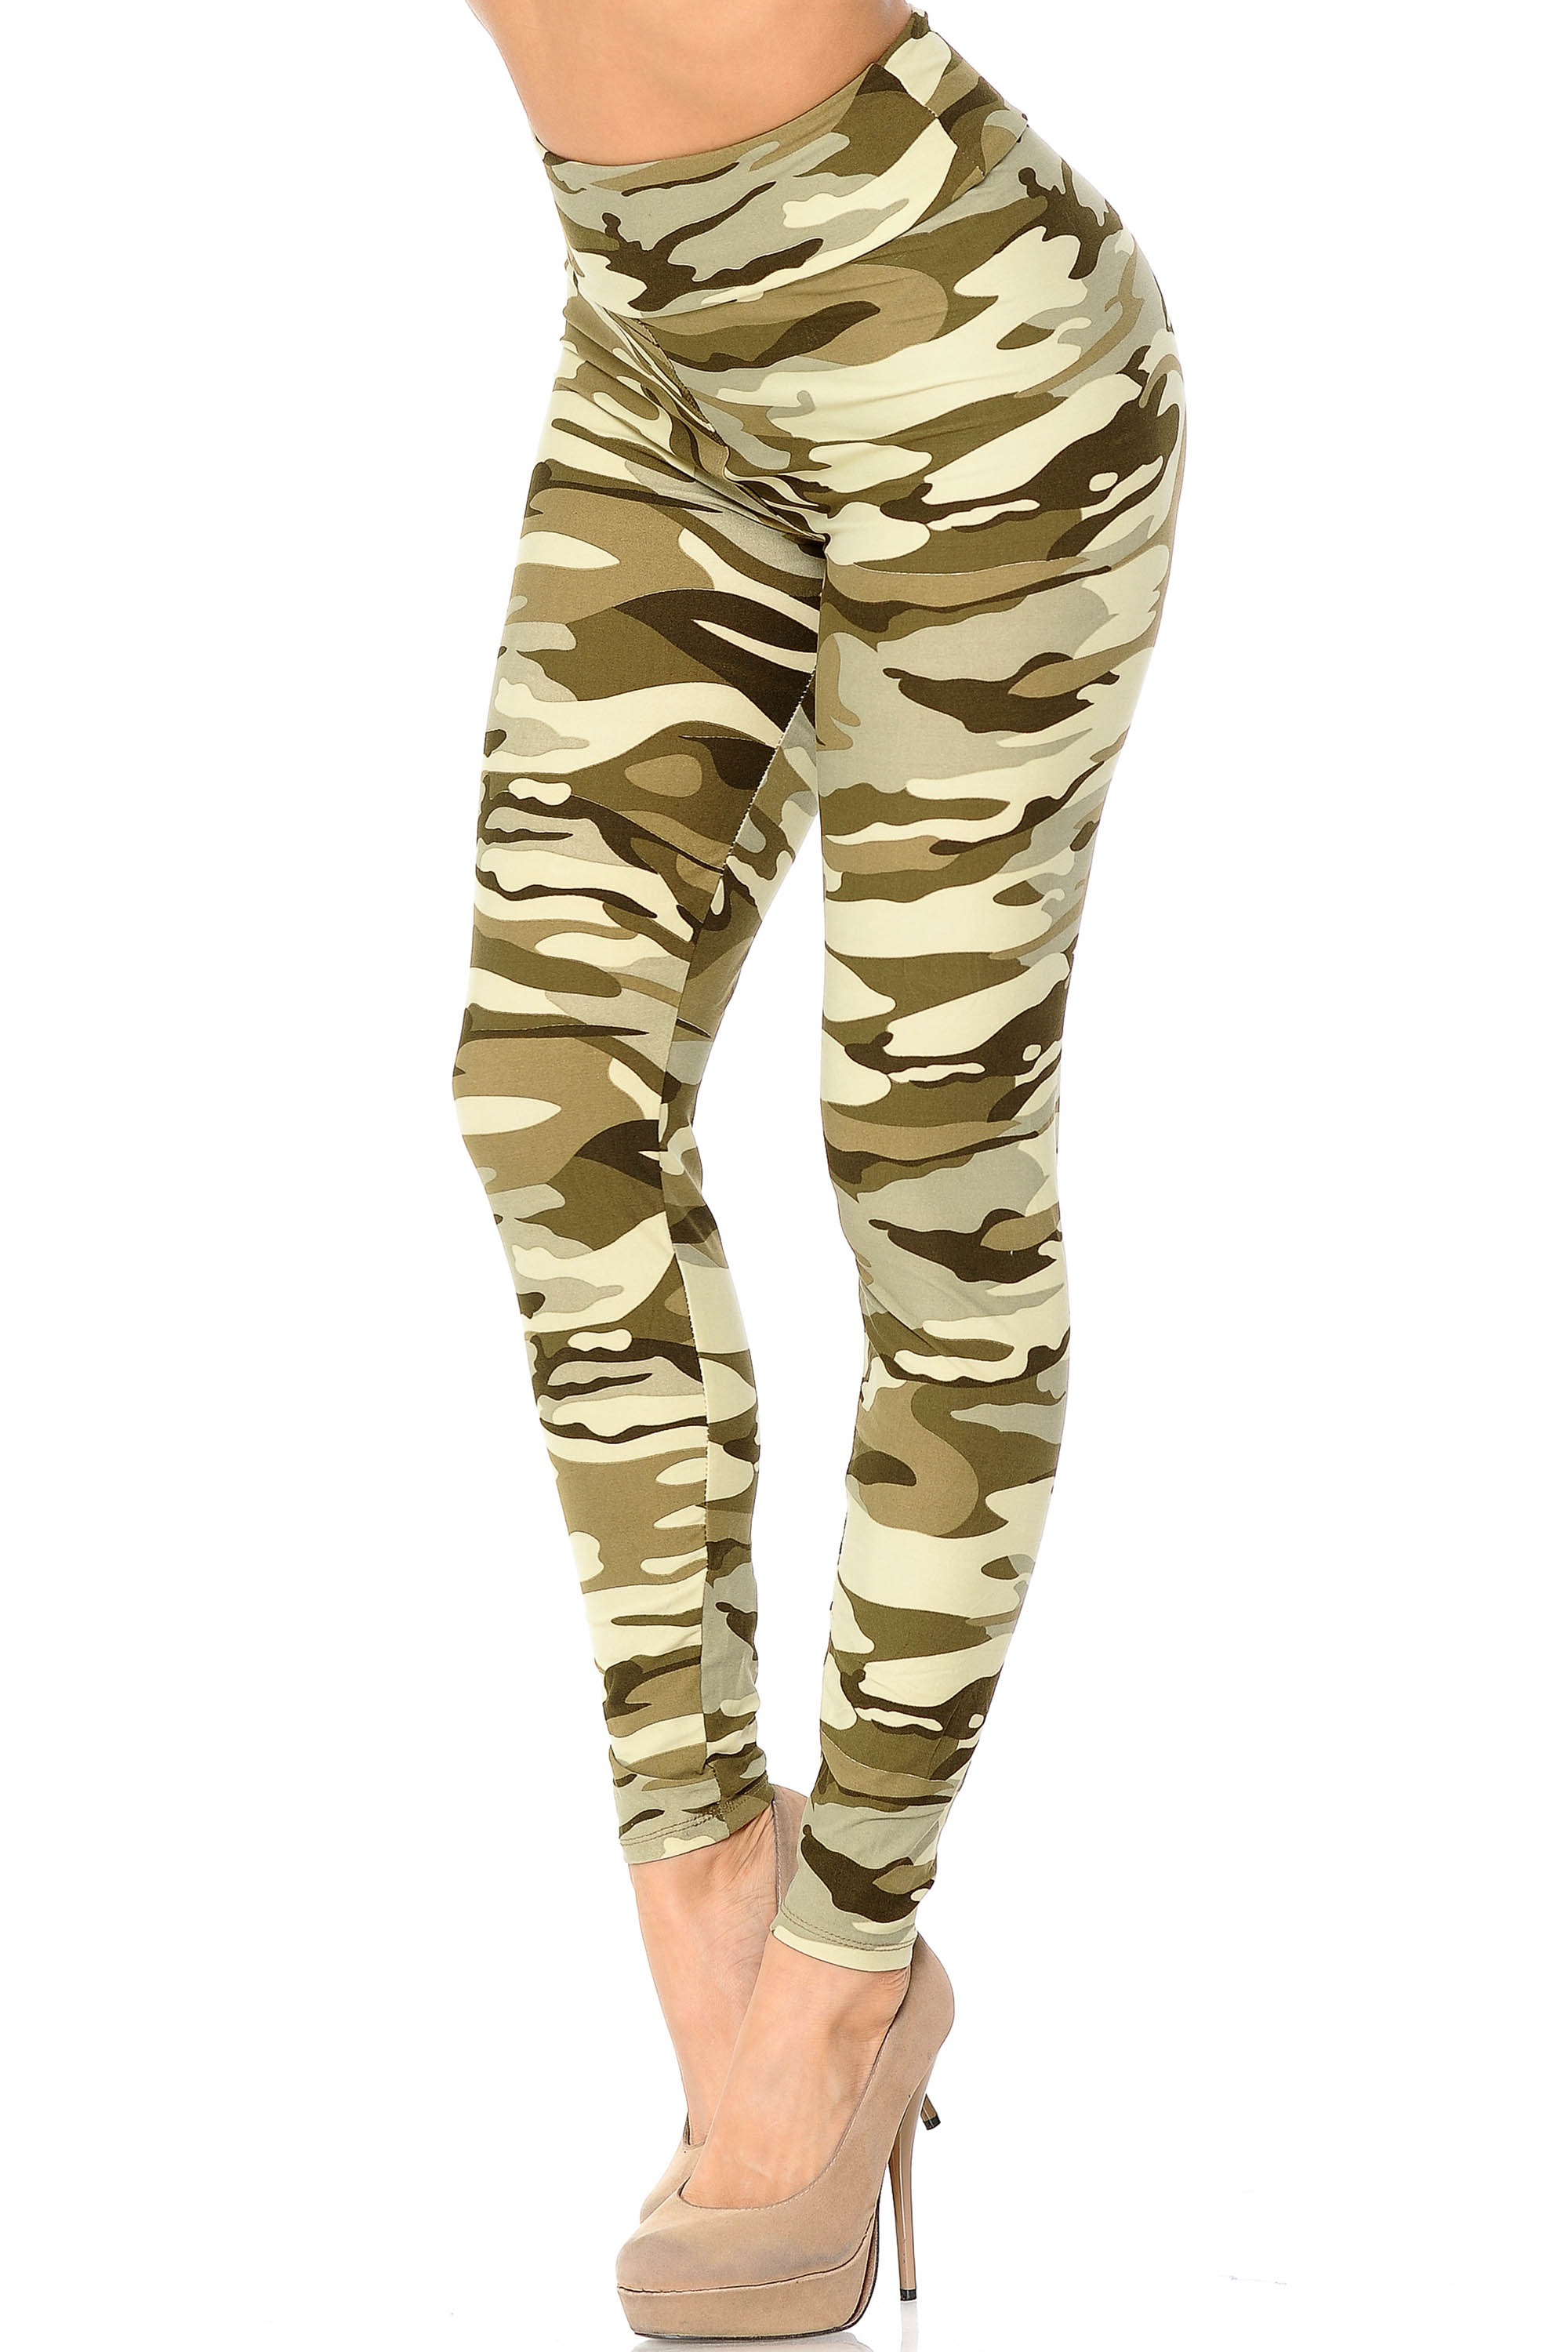 Wholesale Buttery Smooth Light Olive Camouflage High Waisted Leggings